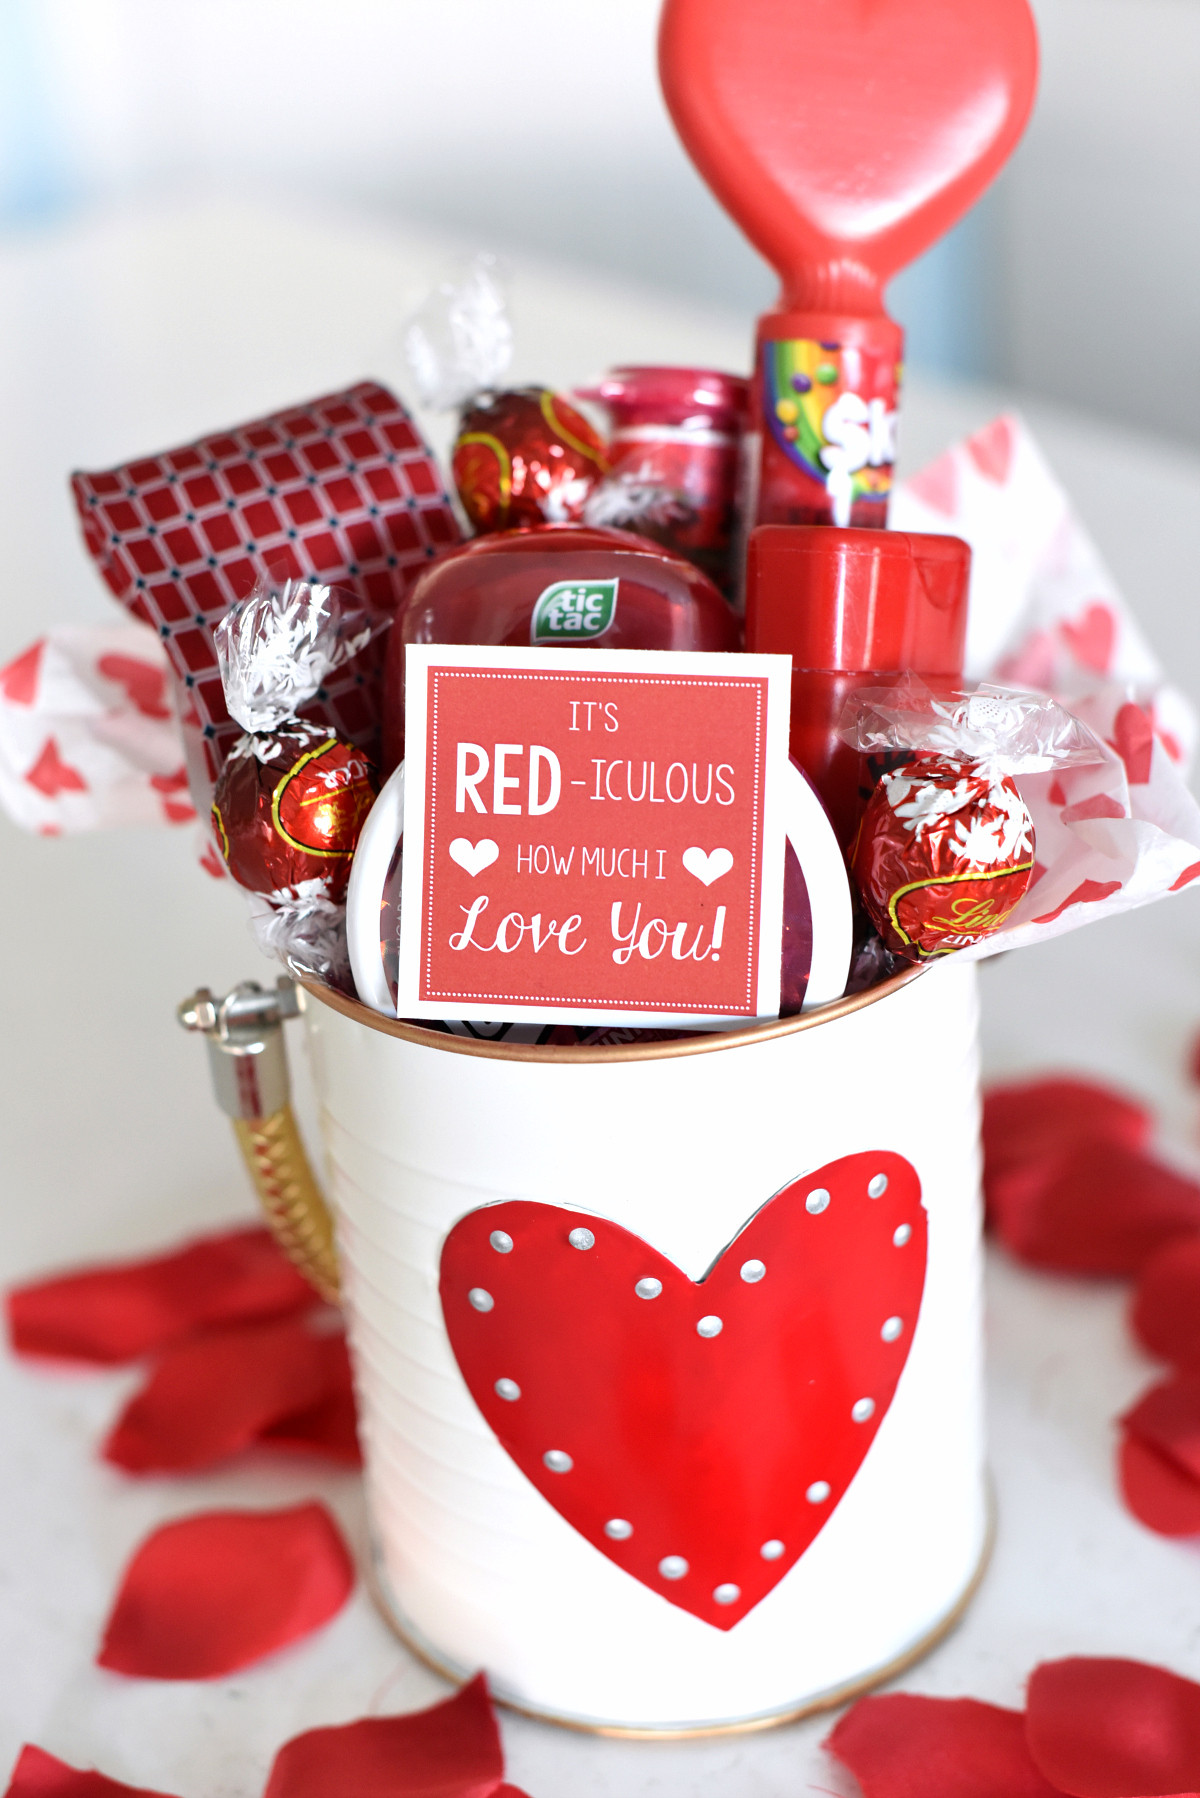 Good Valentines Day Gifts Elegant Cute Valentine S Day Gift Idea Red Iculous Basket